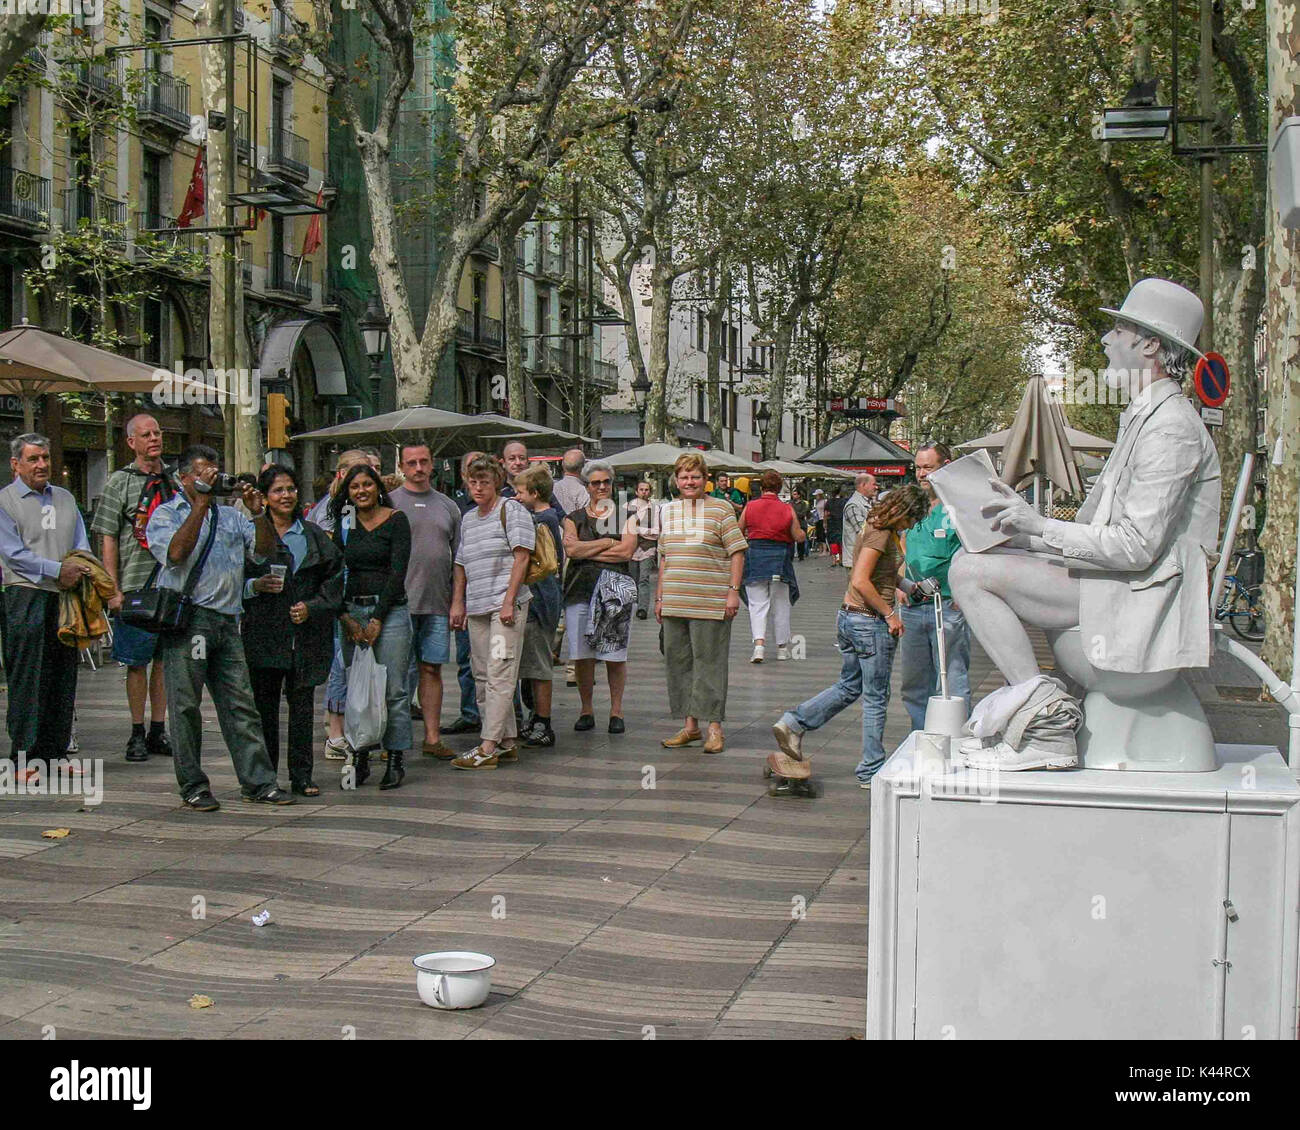 Barcelona, Spain. 19th Oct, 2004. Las Ramblas street performers have entertained for Barcelona tourists and locals alike and are part of the scene of the famed tree lined pedestrian mall. A major tourist destination, Barcelona has a rich cultural heritage. Credit: Arnold Drapkin/ZUMA Wire/Alamy Live News Stock Photo